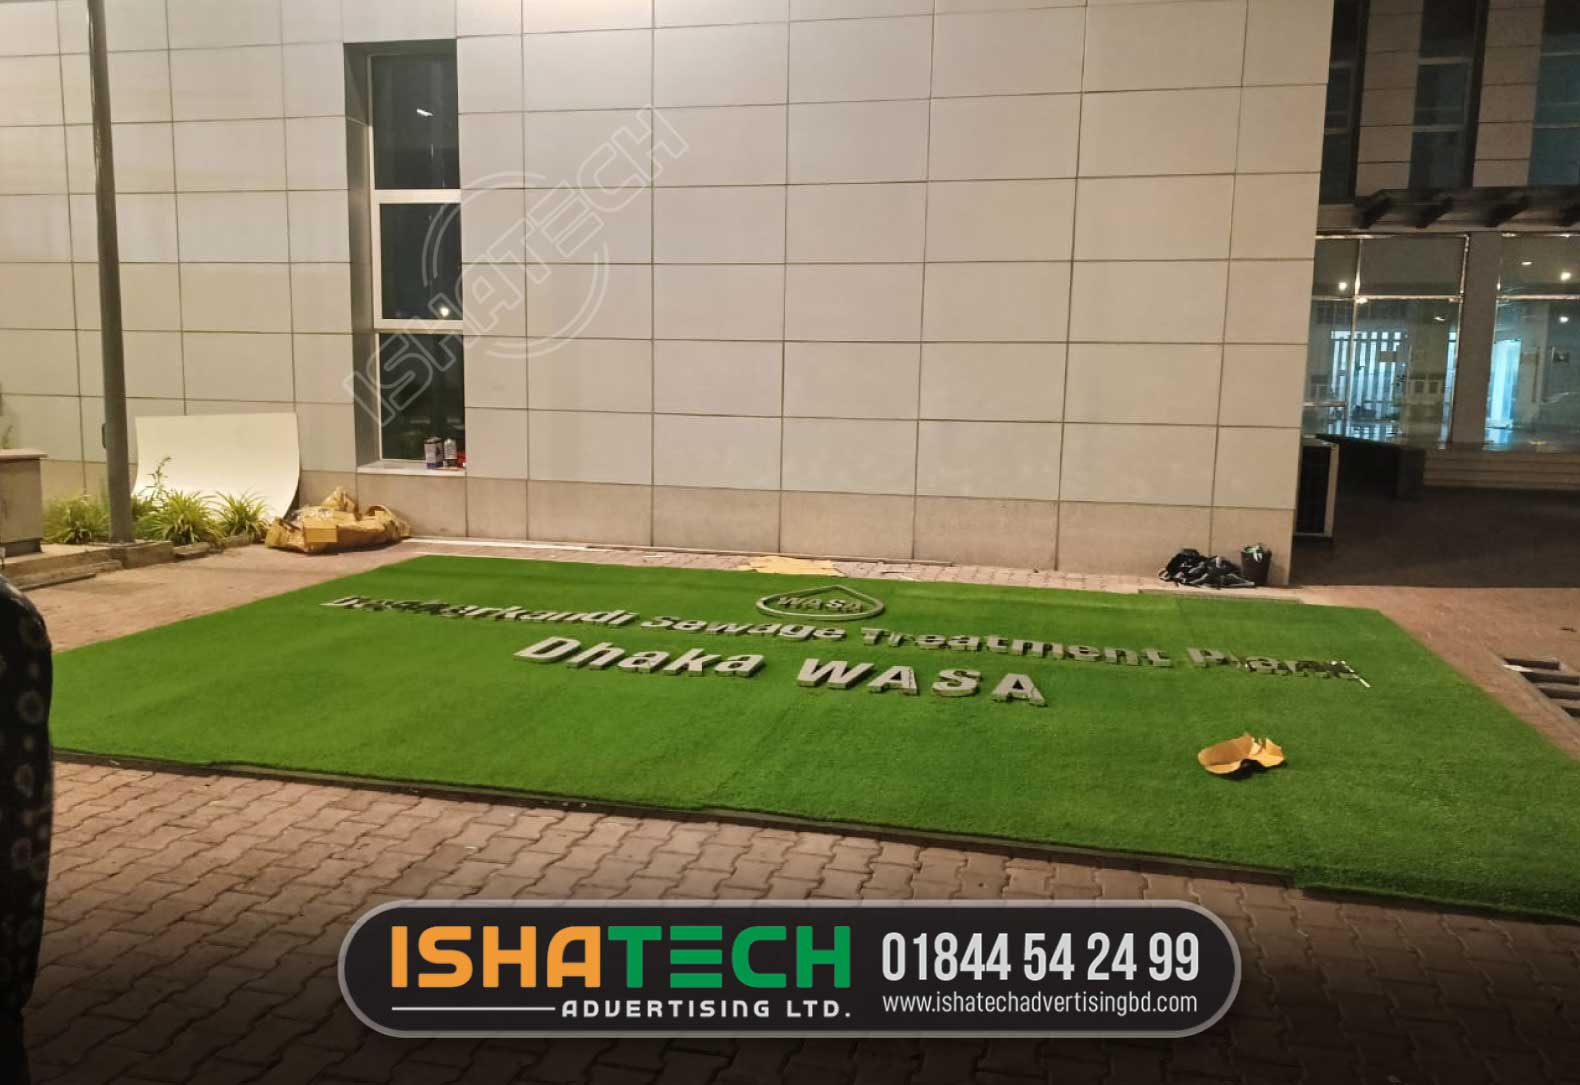 DHAKA WASA SIGNAGE, GRASS CARPET WITH LETTER SIGNAGE BY ISHATECH ADVERTISING AGENCY BD, LED SIGN BD, LETTER SIGN BD, SIGNAGE AGENCY BD